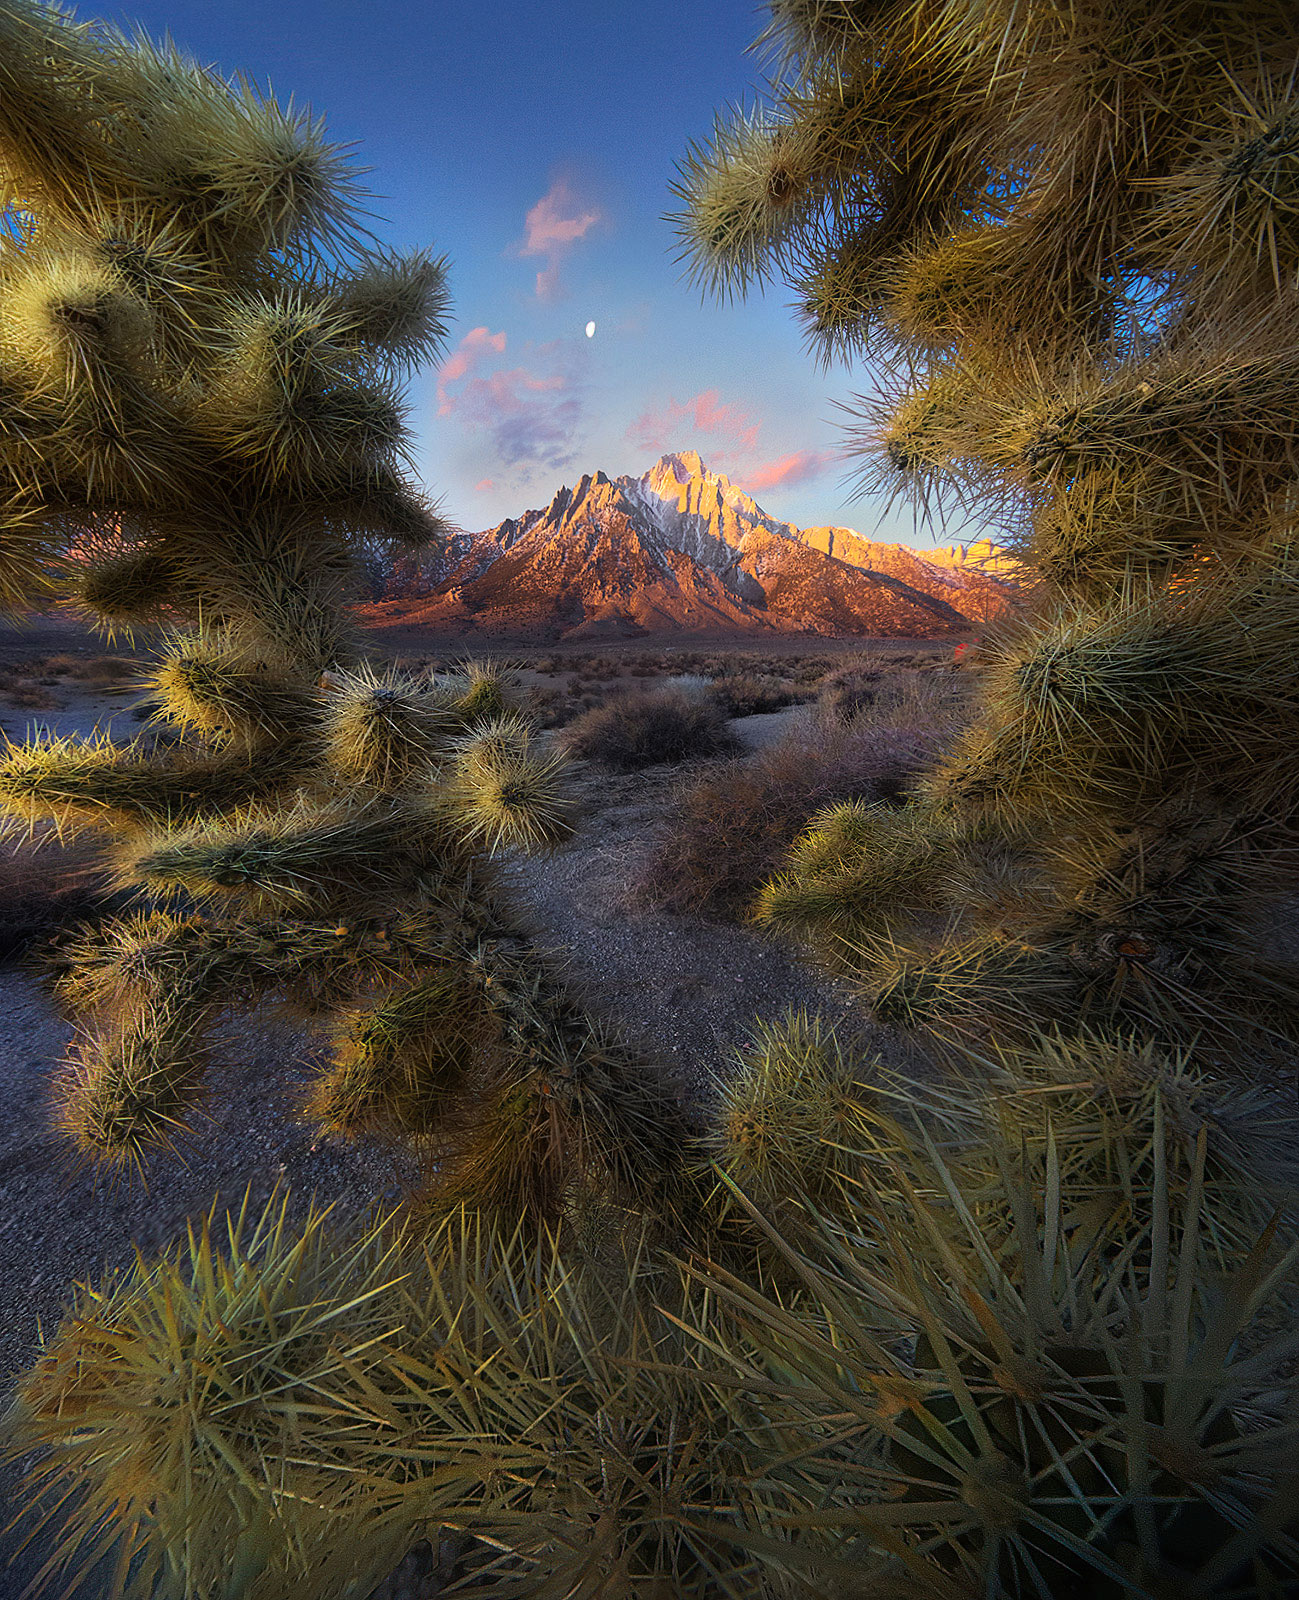 Cholla cactus frames Lone Pine peak in the Eastern Sierra at sunrise.  A unique take on a famous place.